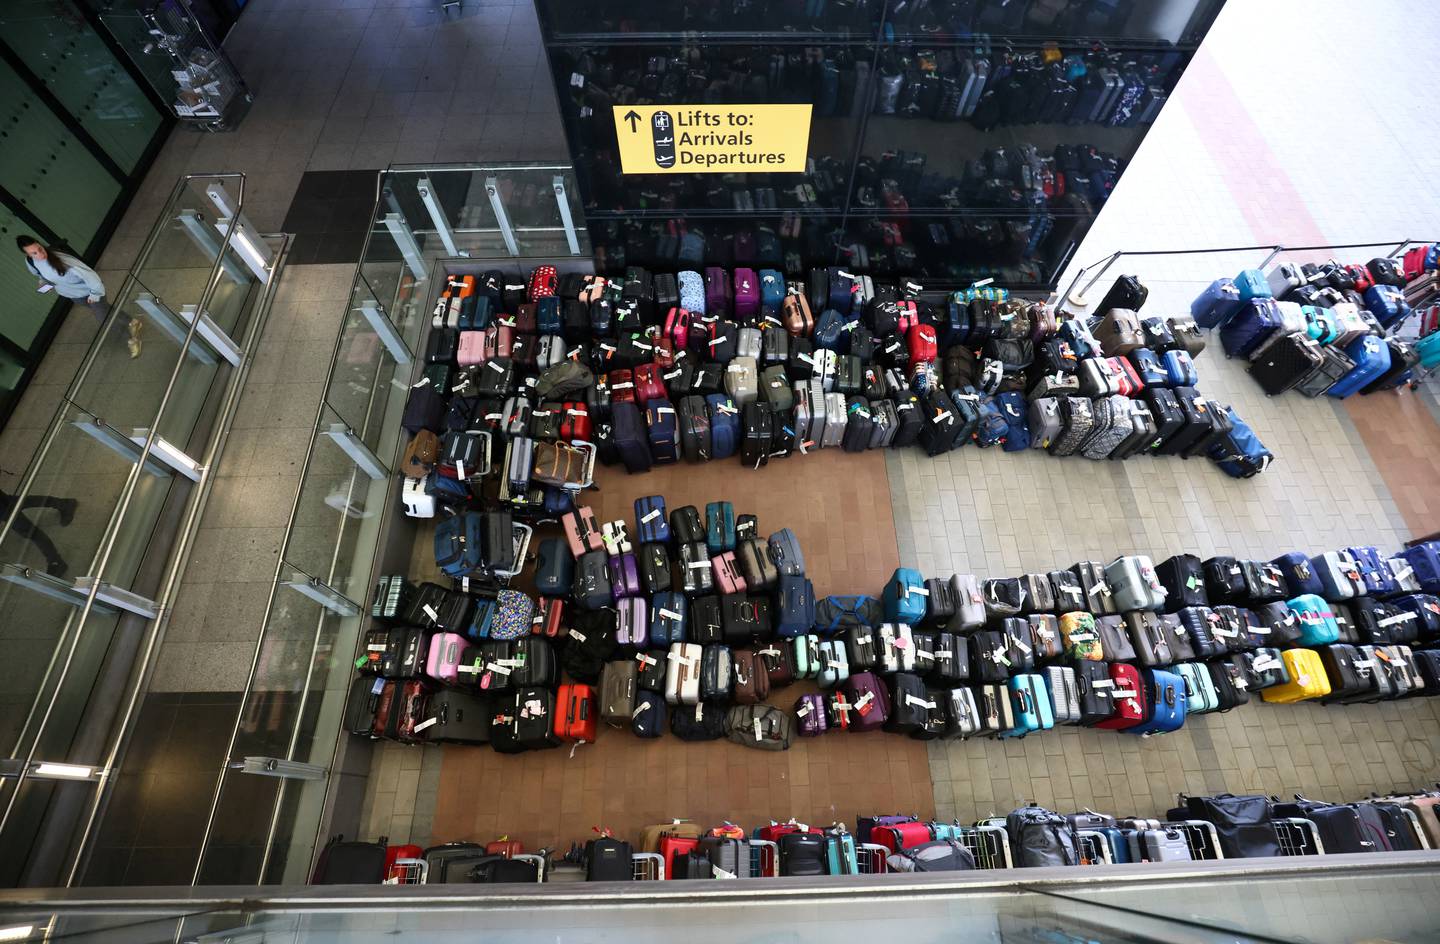 Piles of passenger luggage lie outside Terminal 2 at Heathrow Airport in London. Reuters